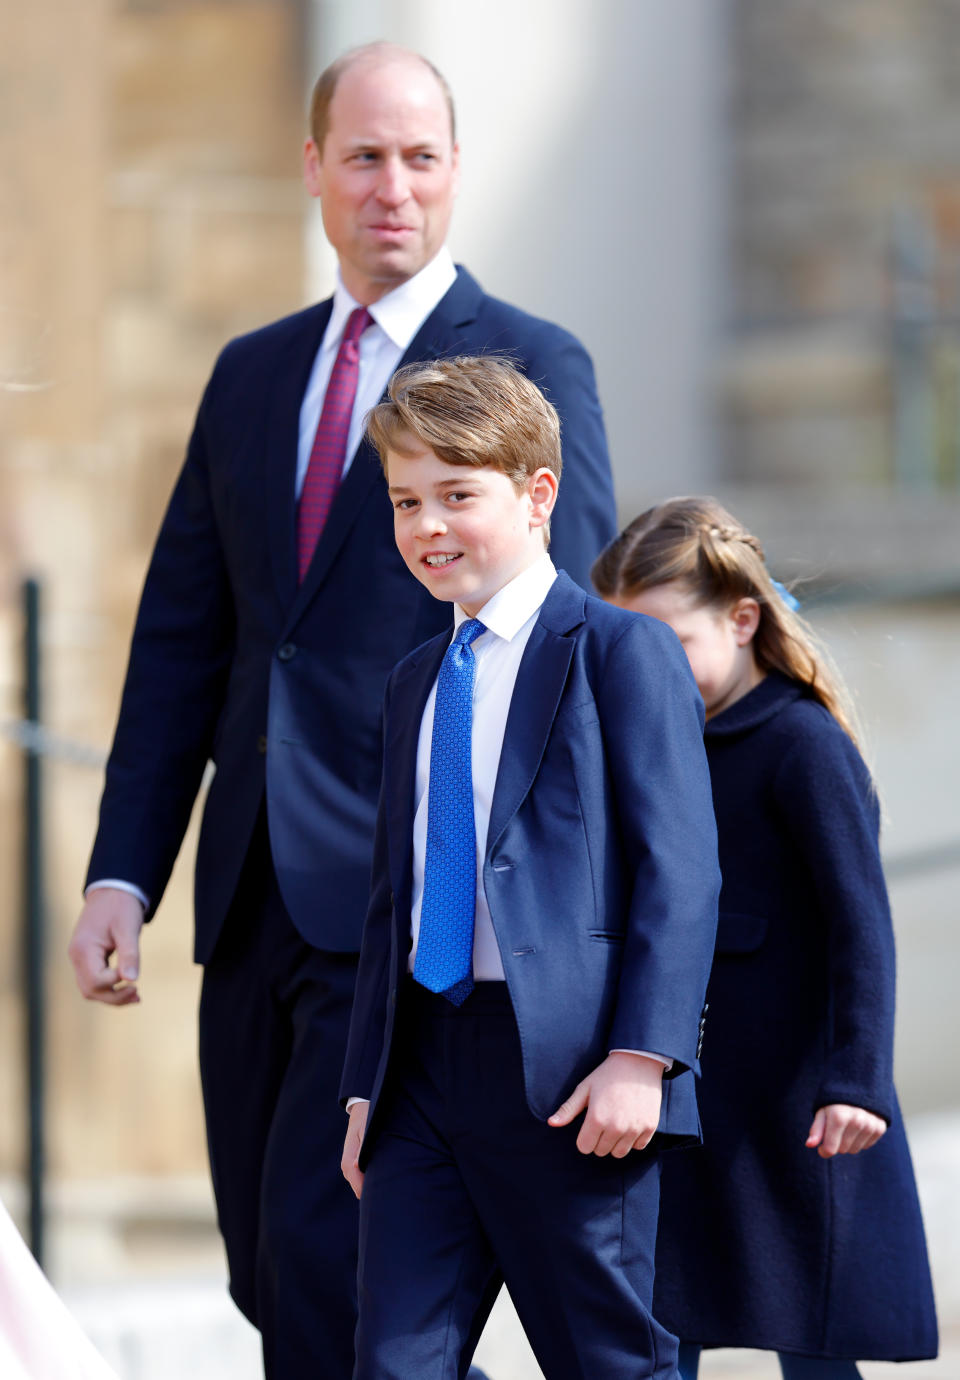 WINDSOR, UNITED KINGDOM - APRIL 09: (EMBARGOED FOR PUBLICATION IN UK NEWSPAPERS UNTIL 24 HOURS AFTER CREATE DATE AND TIME) Prince William, Prince of Wales, Prince George of Wales and Princess Charlotte of Wales attend the traditional Easter Sunday Mattins Service at St George's Chapel, Windsor Castle on April 9, 2023 in Windsor, England. (Photo by Max Mumby/Indigo/Getty Images)